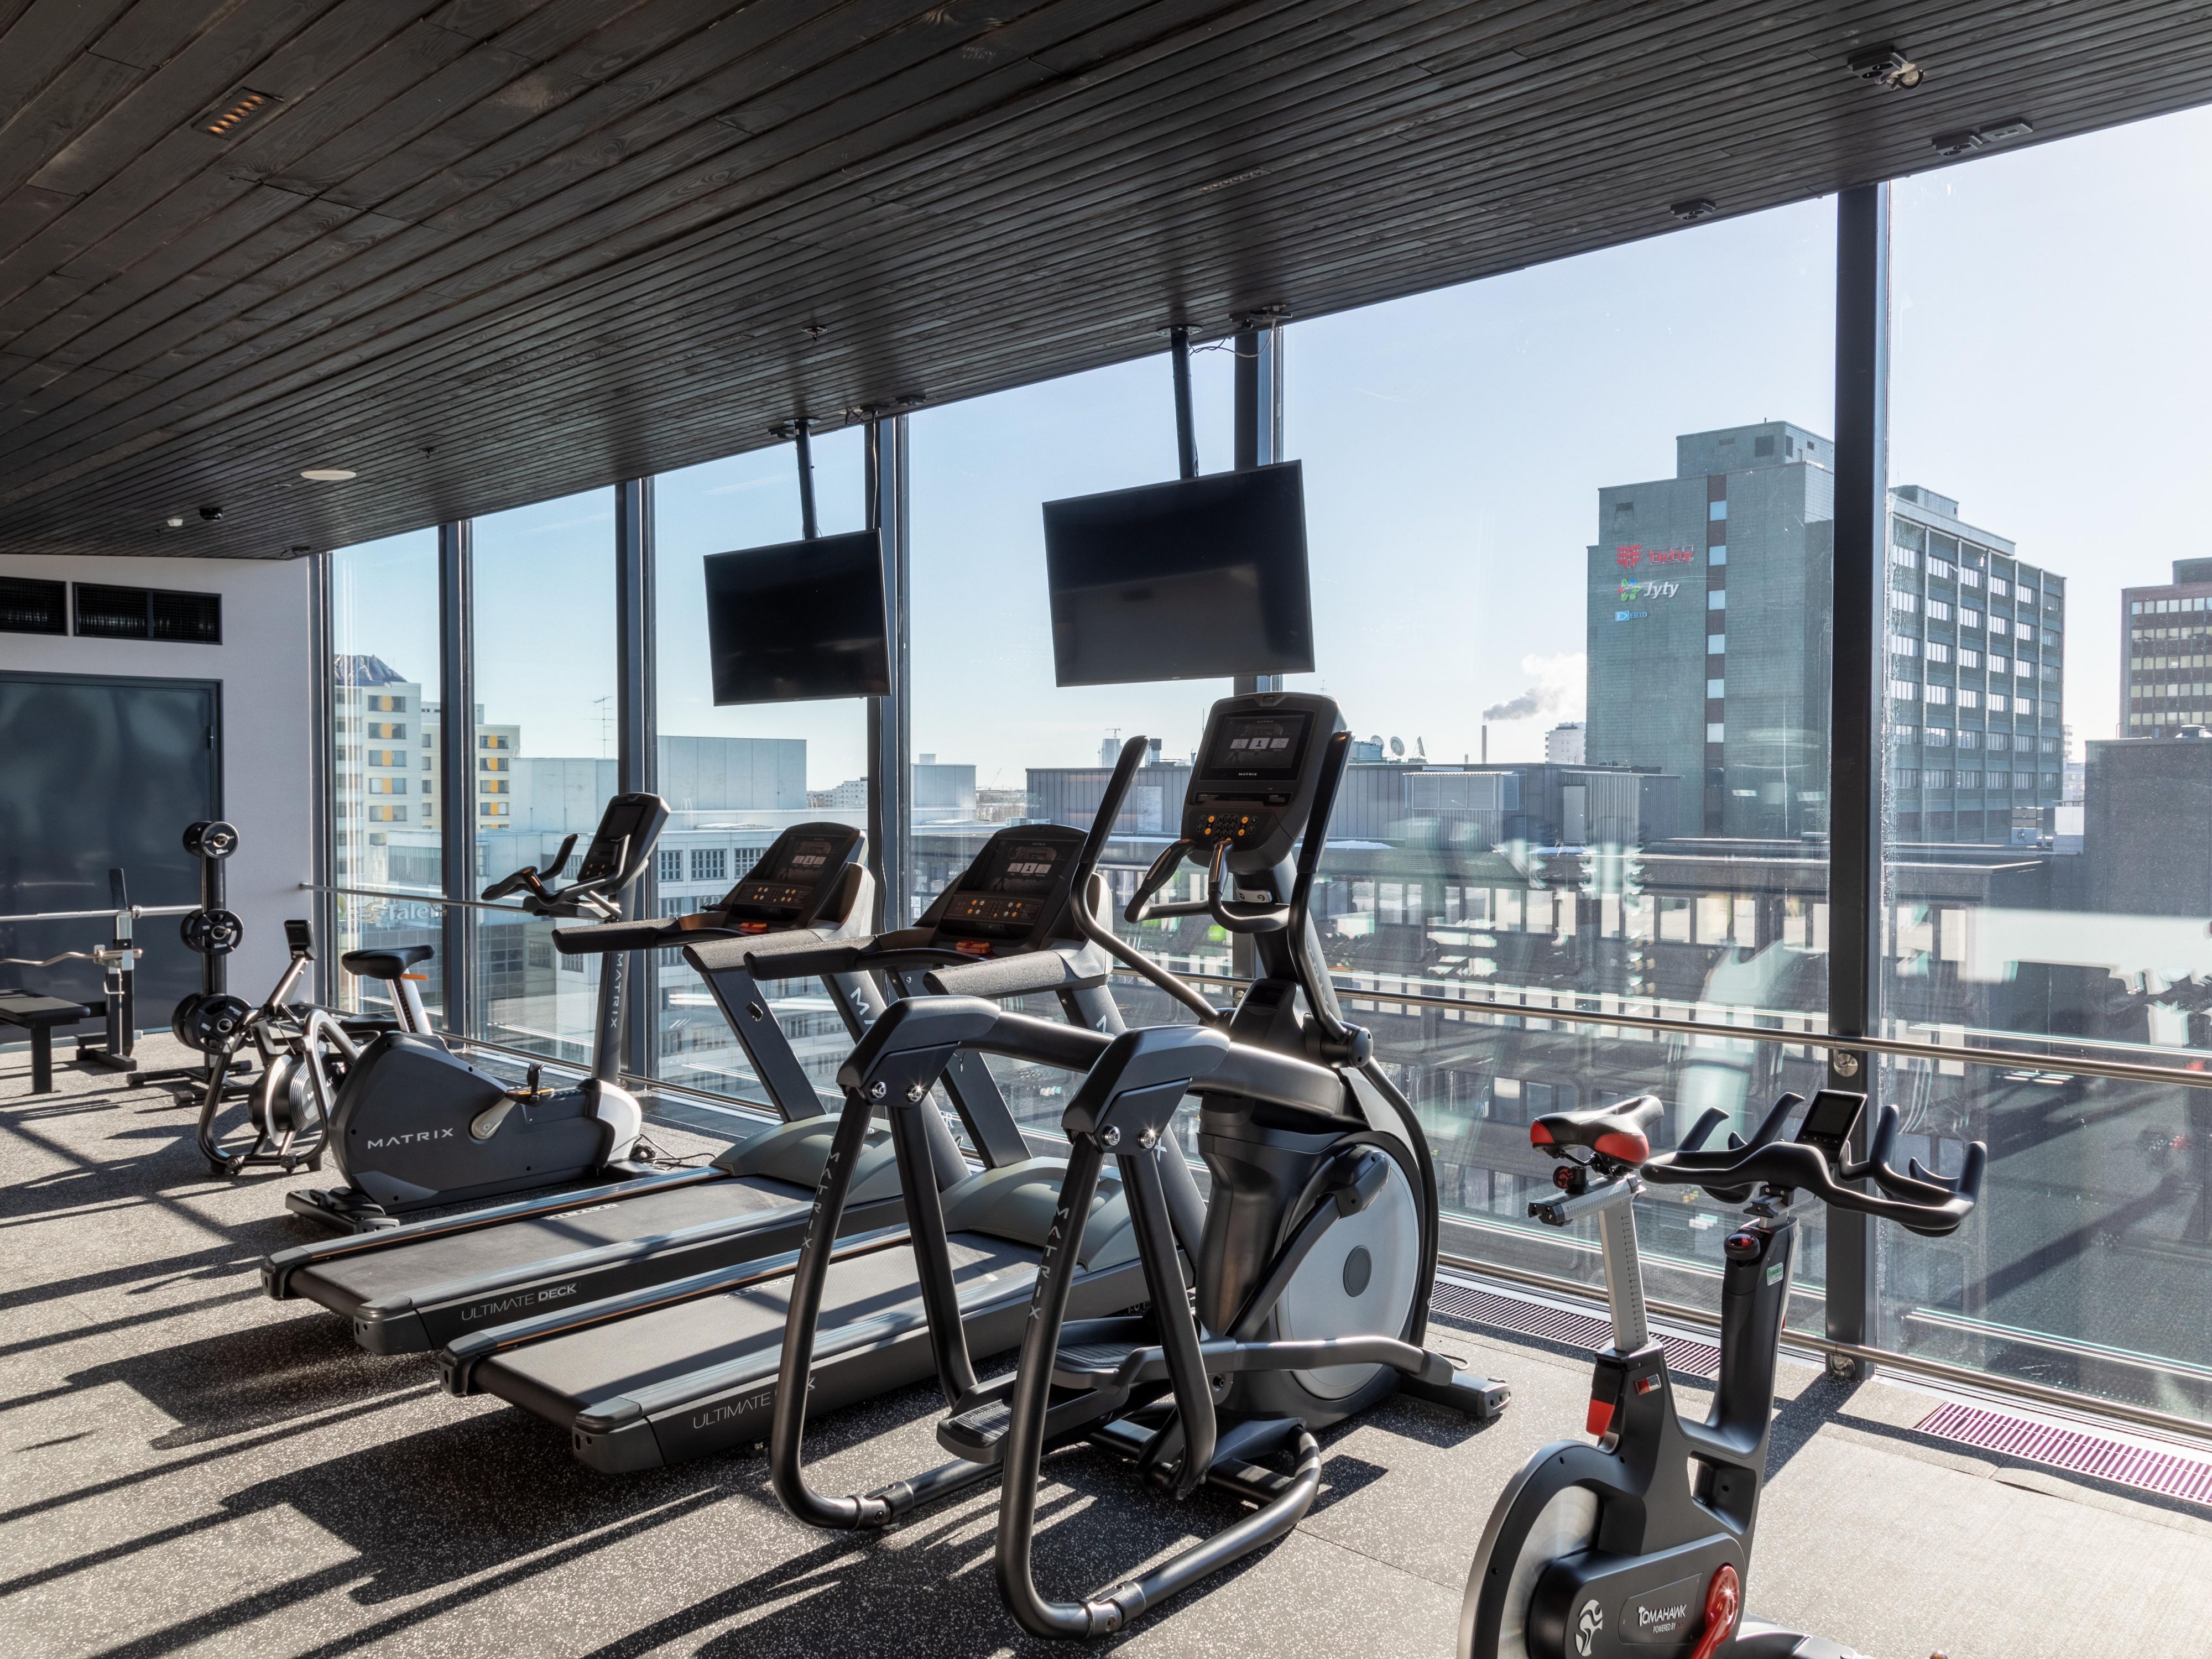 Work out and admire the scenery in our magnificent gym. Holiday Inn Helsinki – Expo offers free use of one of the city’s most magnificent gyms. The hotel’s top-floor gym offers great views over Pasila. The versatile range of equipment enables comprehensive fitness training.